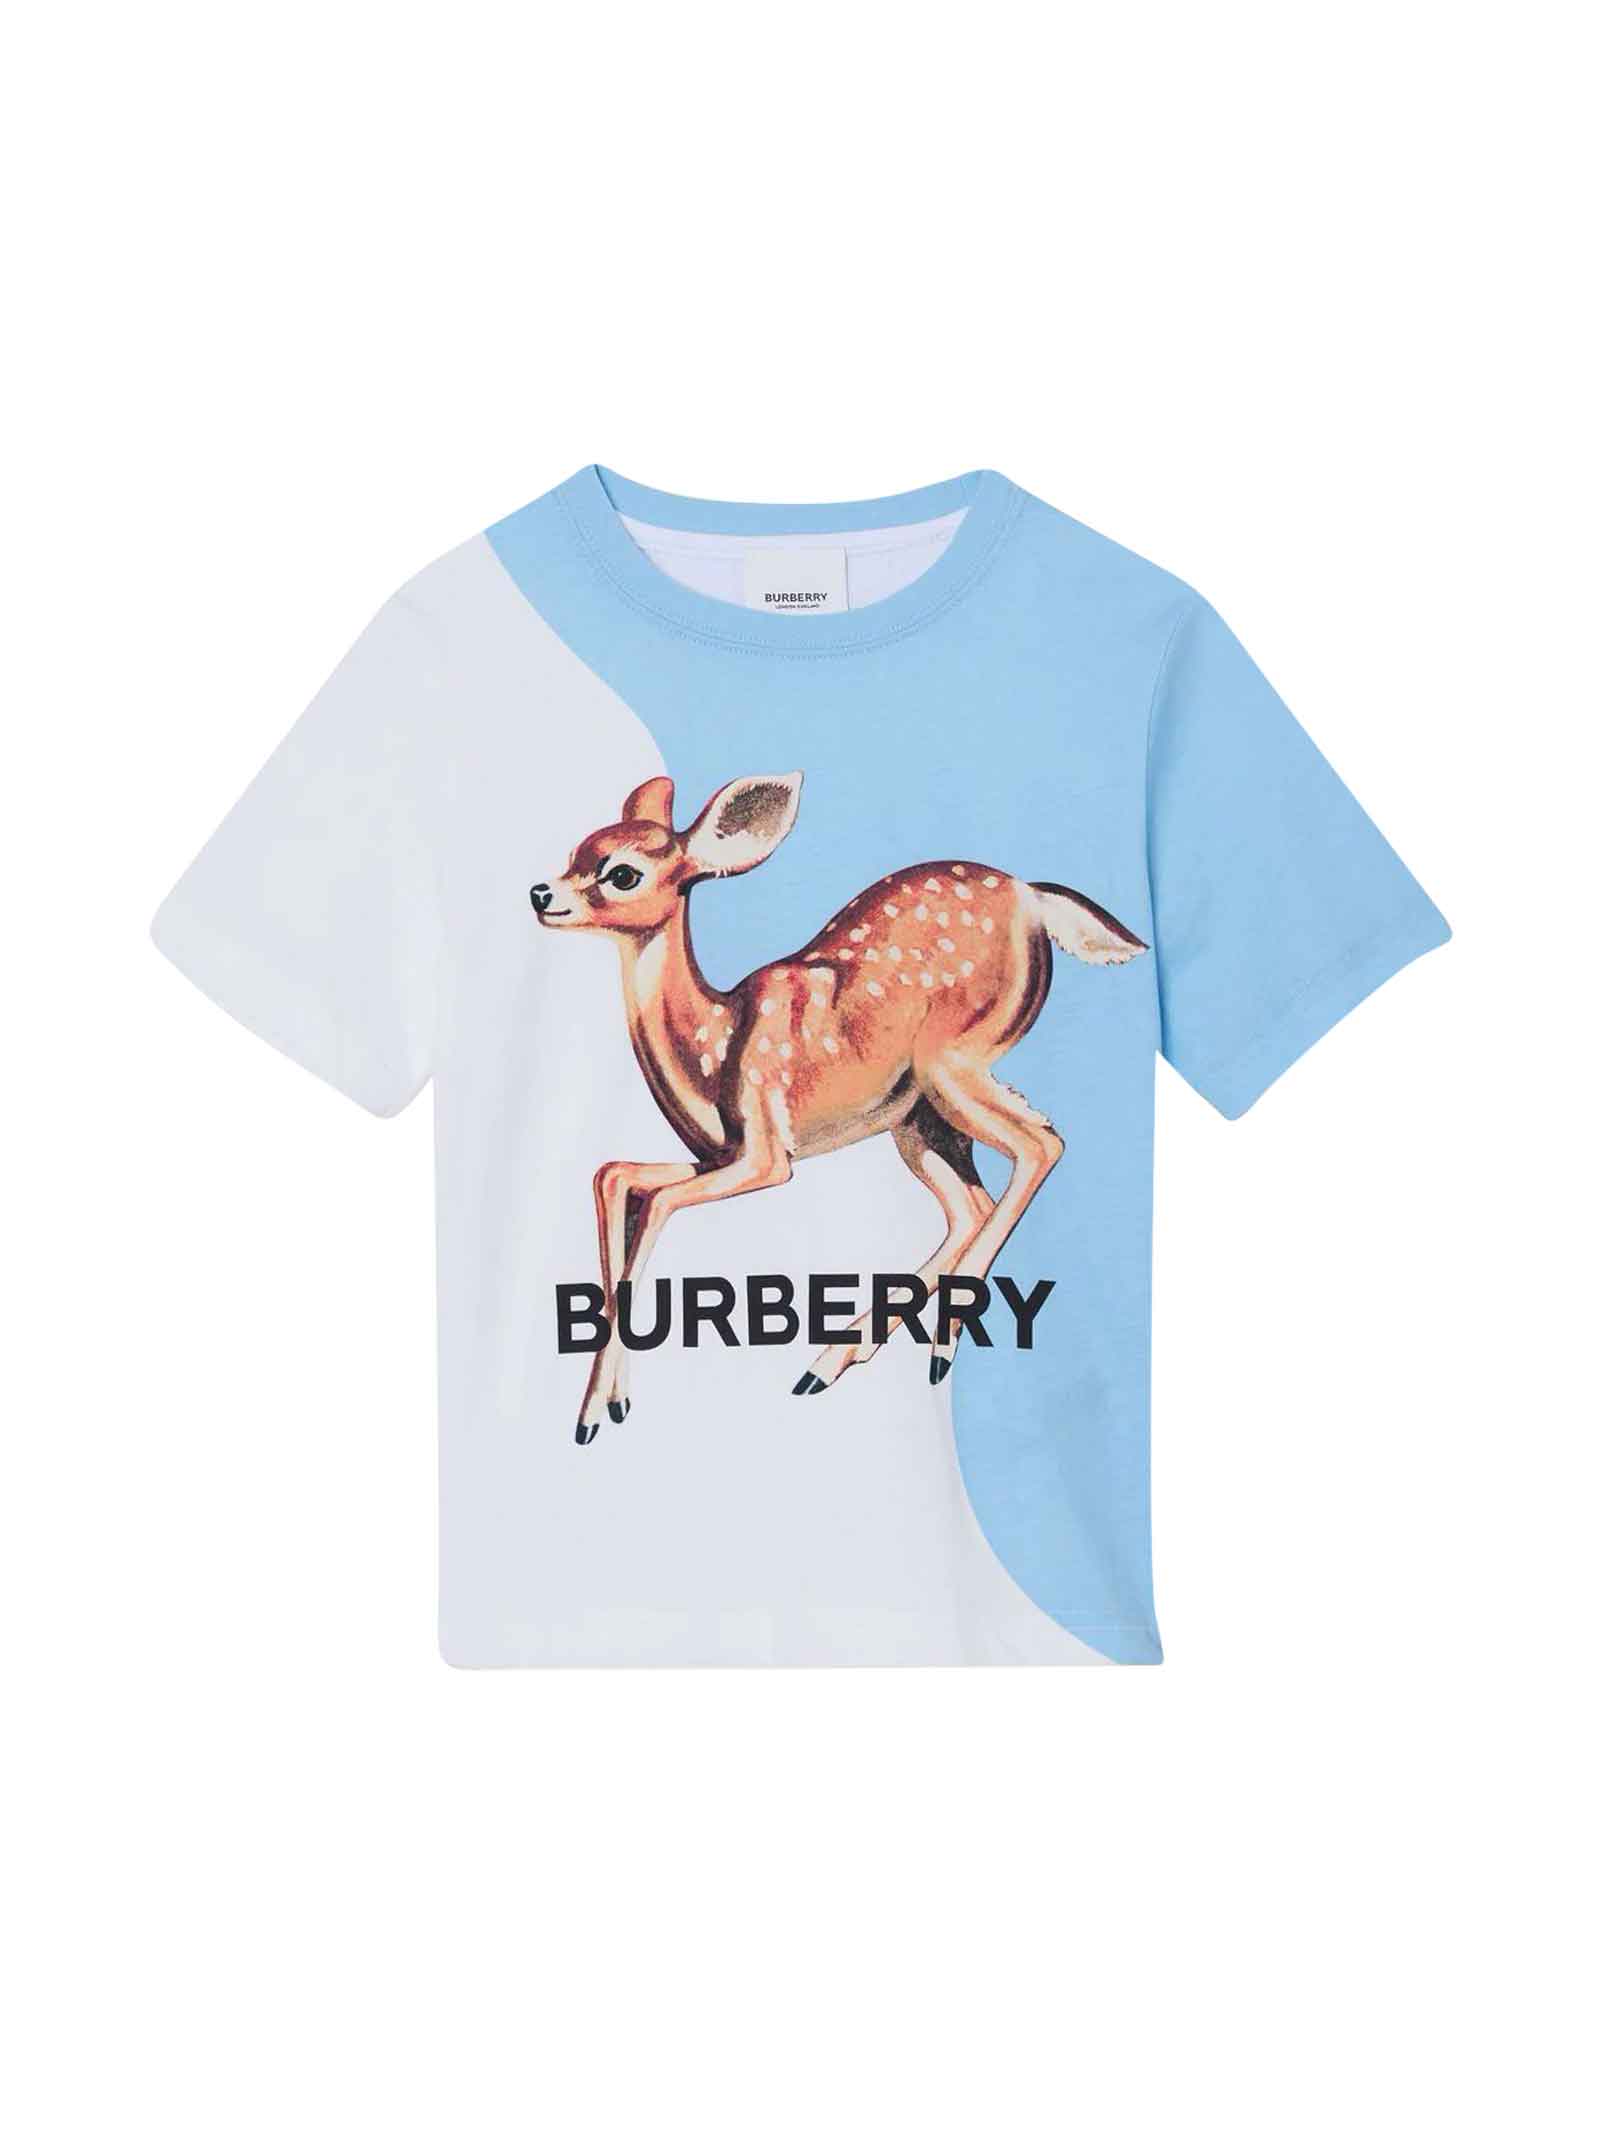 Burberry White And Blue T-shirt With Print